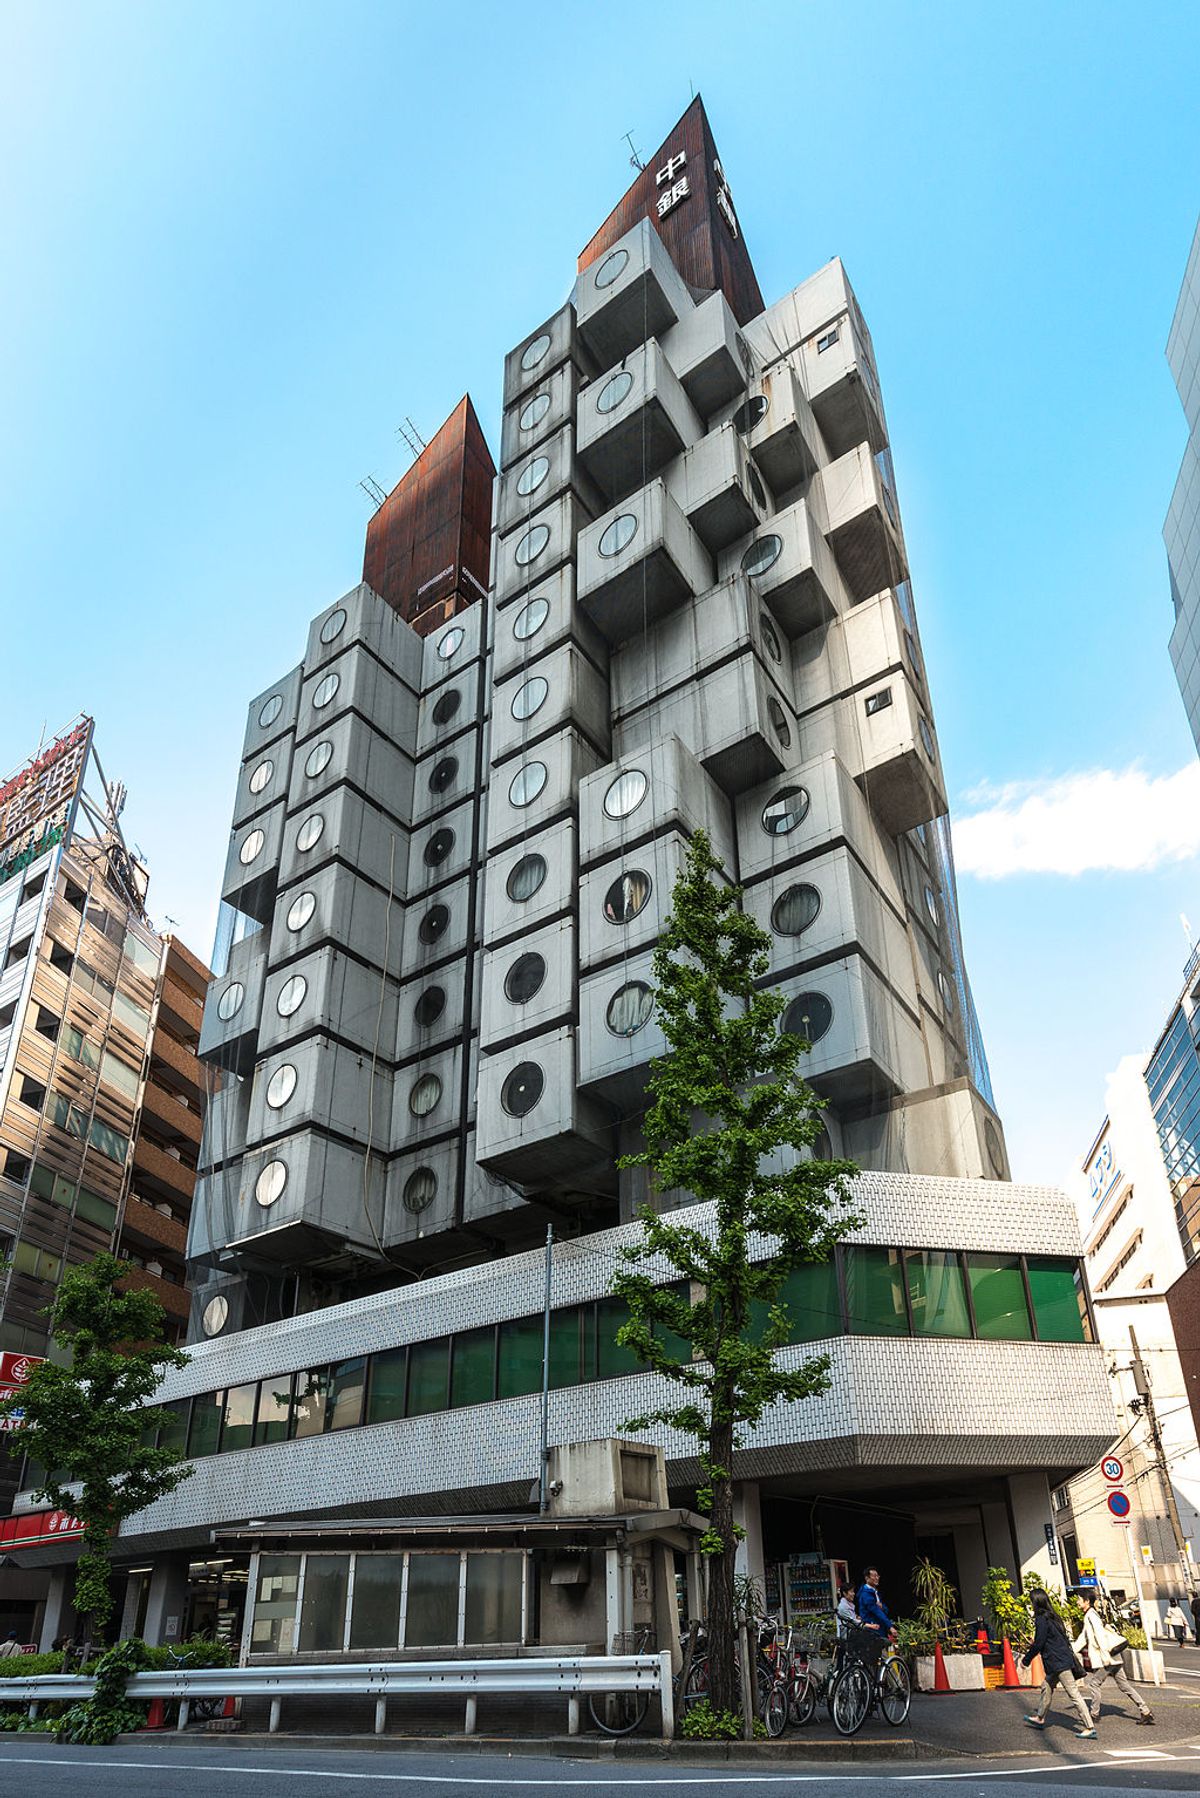 The Nakagin Capsule Tower before its demolition in 2022 Photo by Jordy Meow, via Wikimedia Commons